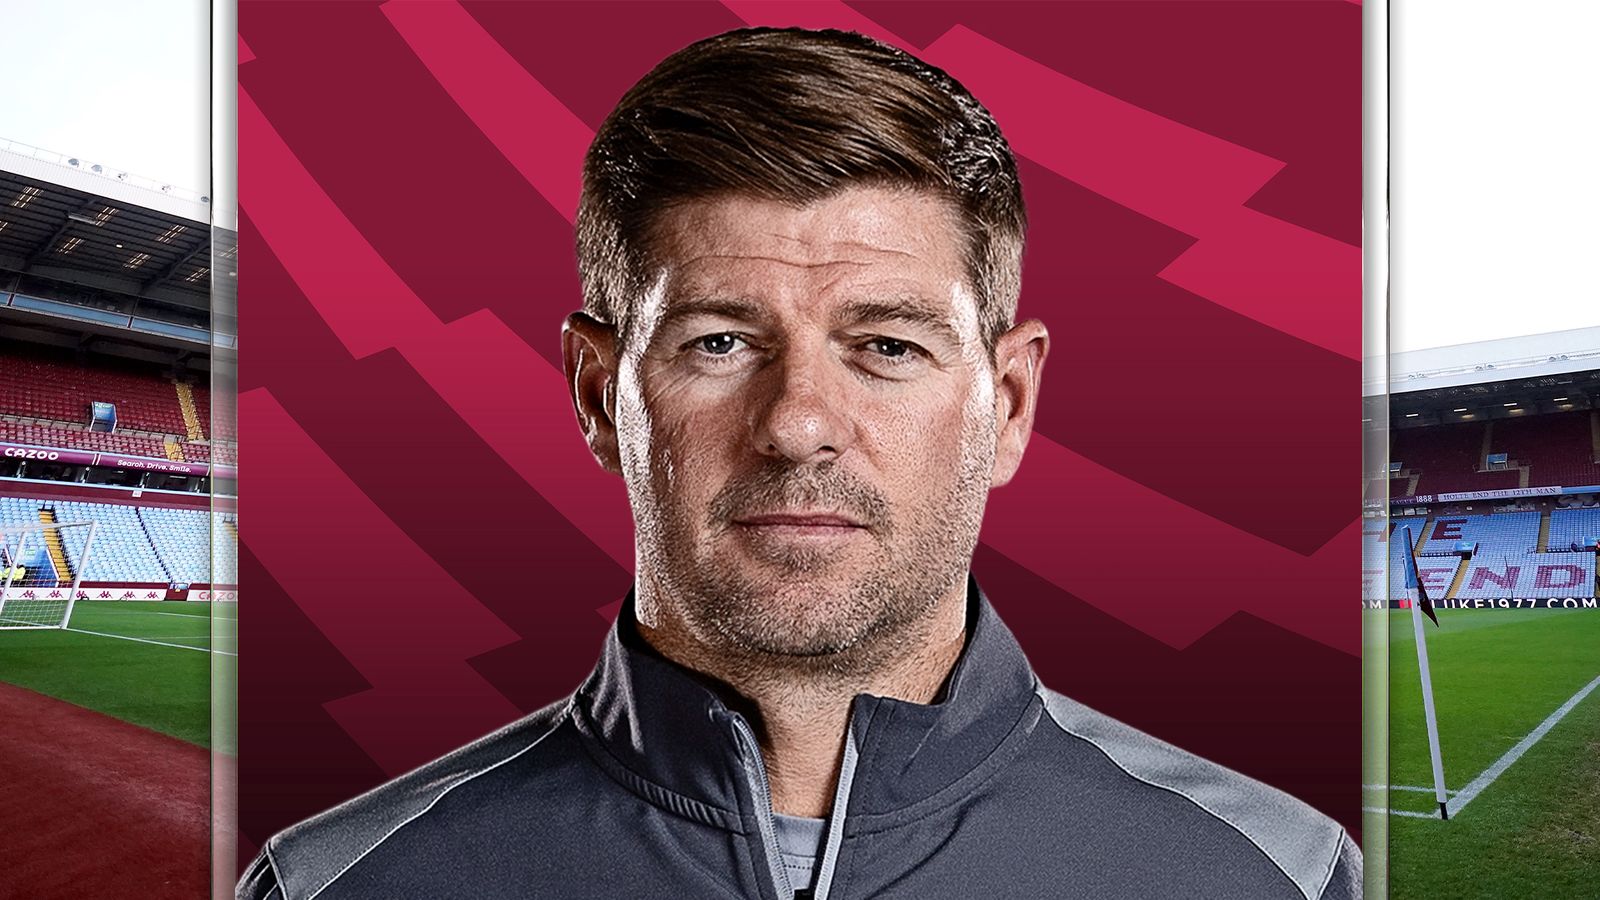 steven-gerrard-exclusive-aston-villa-boss-needs-time-to-prove-boo-boys-wrong-as-pressure-grows-ahead-of-chelsea-clash